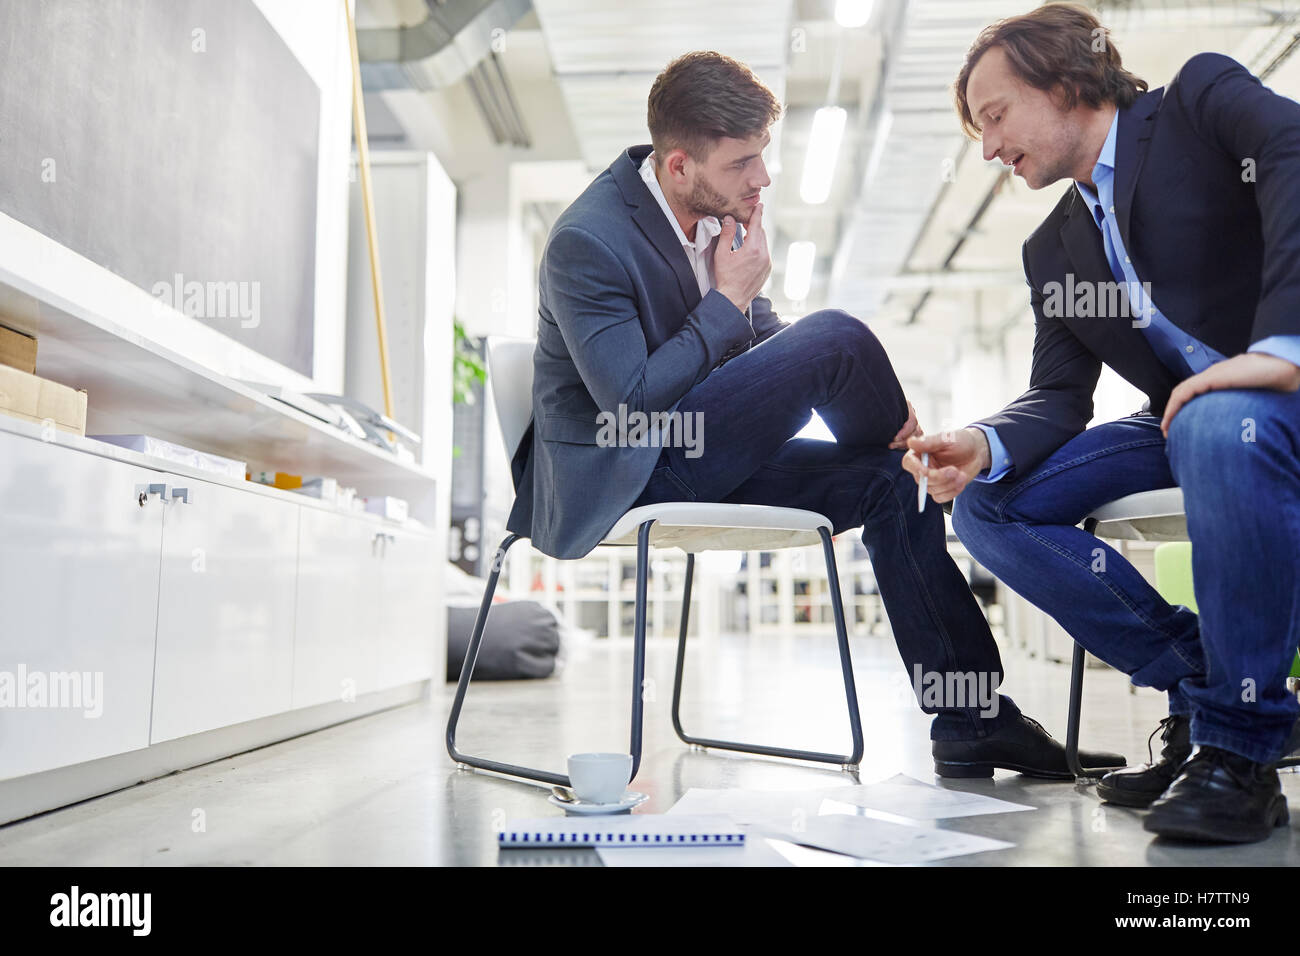 Two business people in dialogue during brainstorming Stock Photo